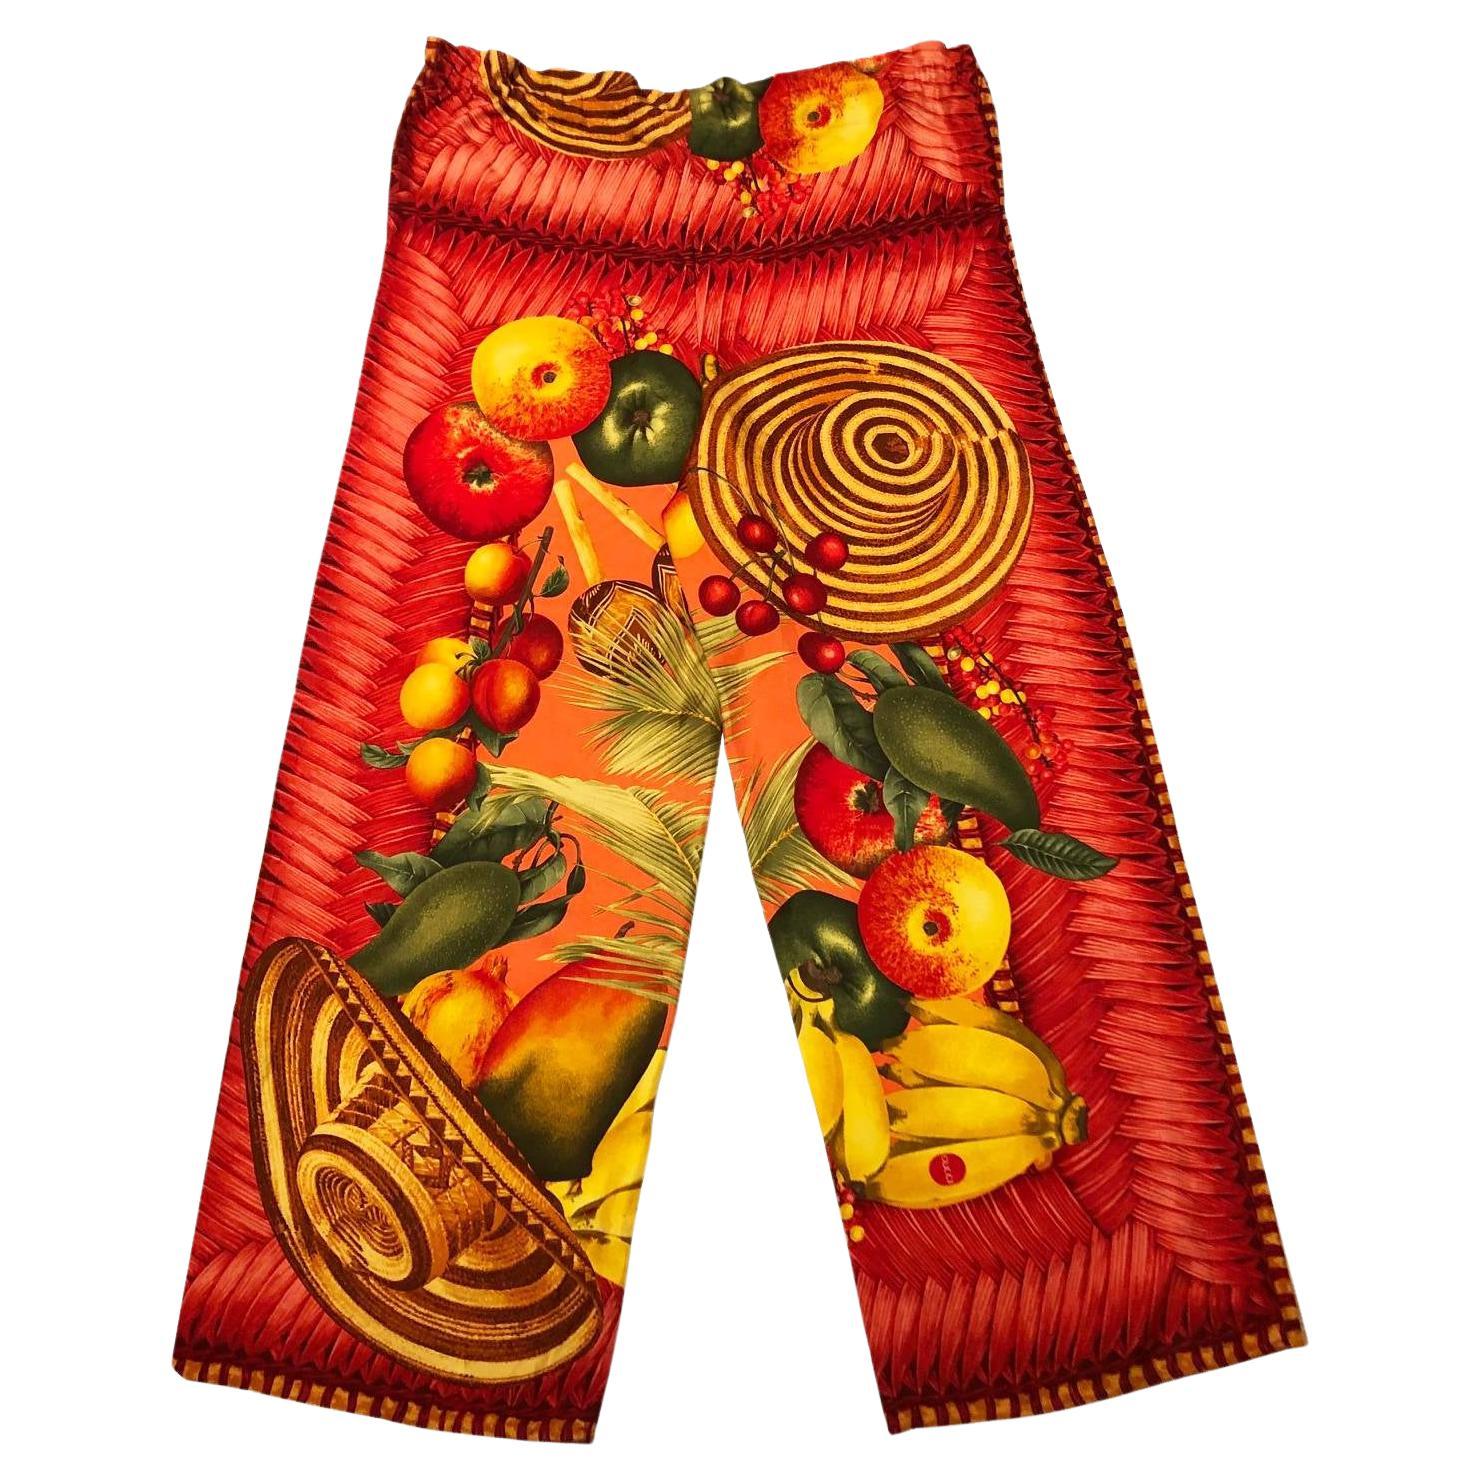 Stunning unseen Gucci by Tom Ford silk trousers, exotic tropical print wide leg bloomer design, Gucci logo print, Made in Italy, 100% silk 

Size: 40 Italian, 8 UK, 0-2 USA
This pair can also suit a 42 Italian, 10 UK, 2-4 USA being baggy